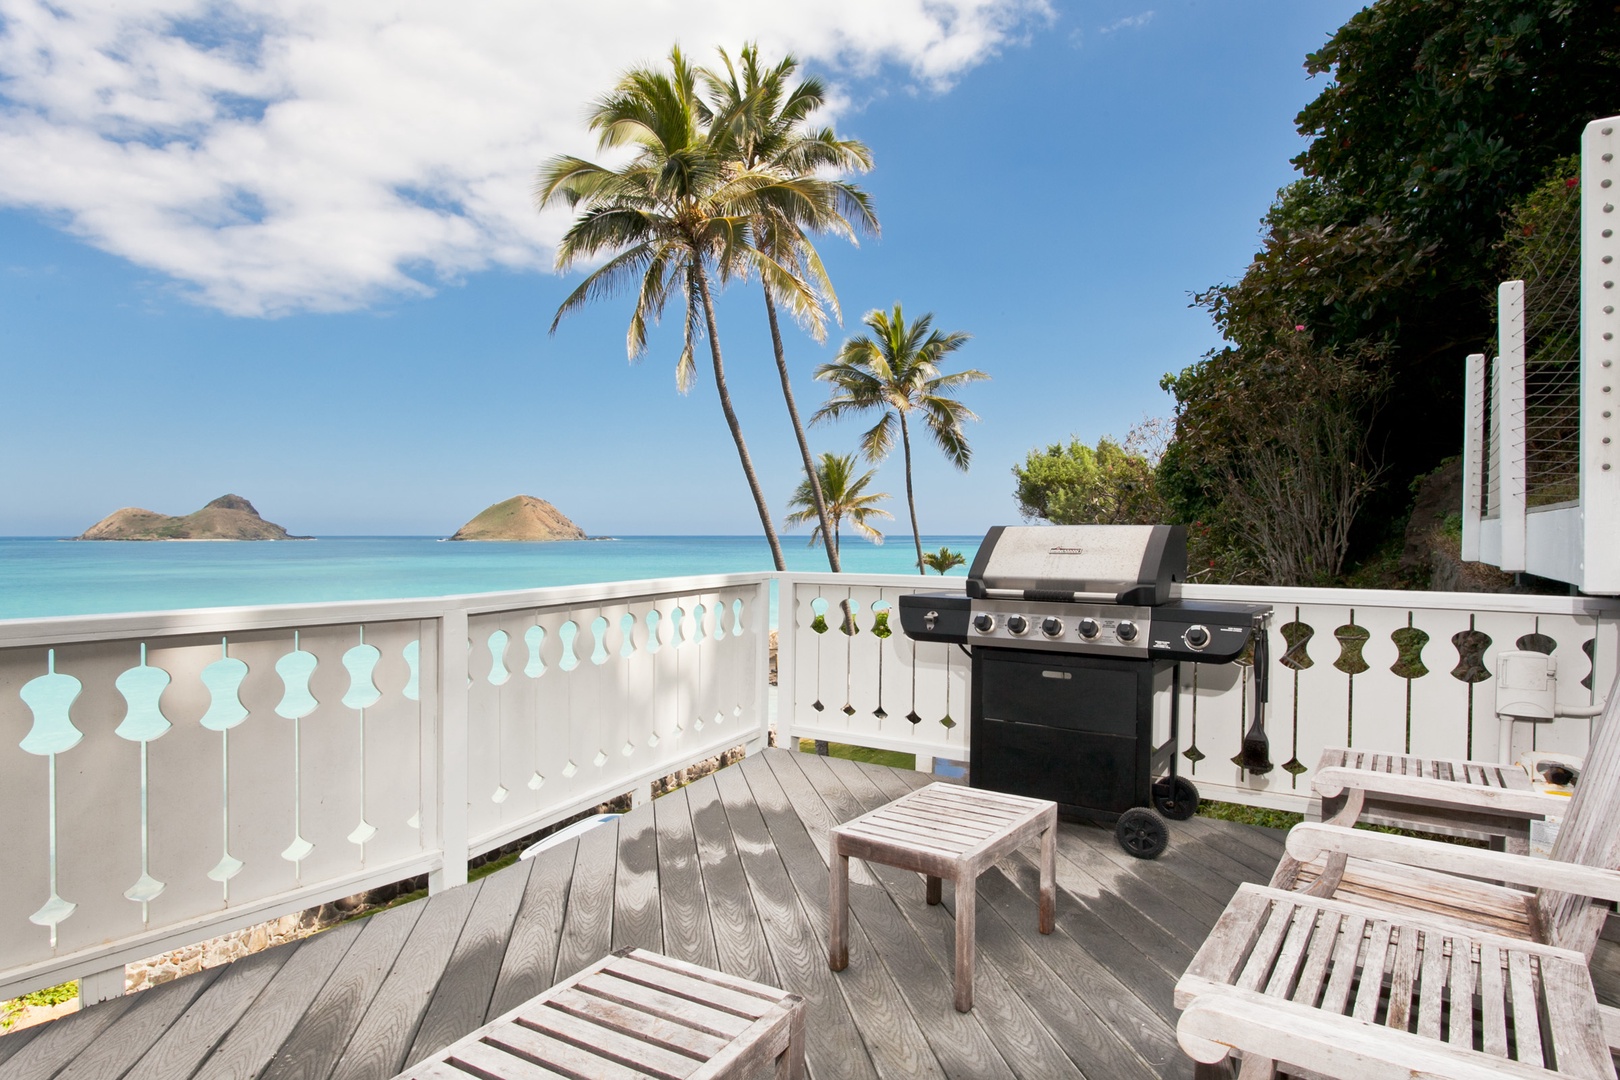 Kailua Vacation Rentals, Lanikai Village* - Hale Mahina Lanikai: Lanai with a gas grill for cooking dinner by the beach!